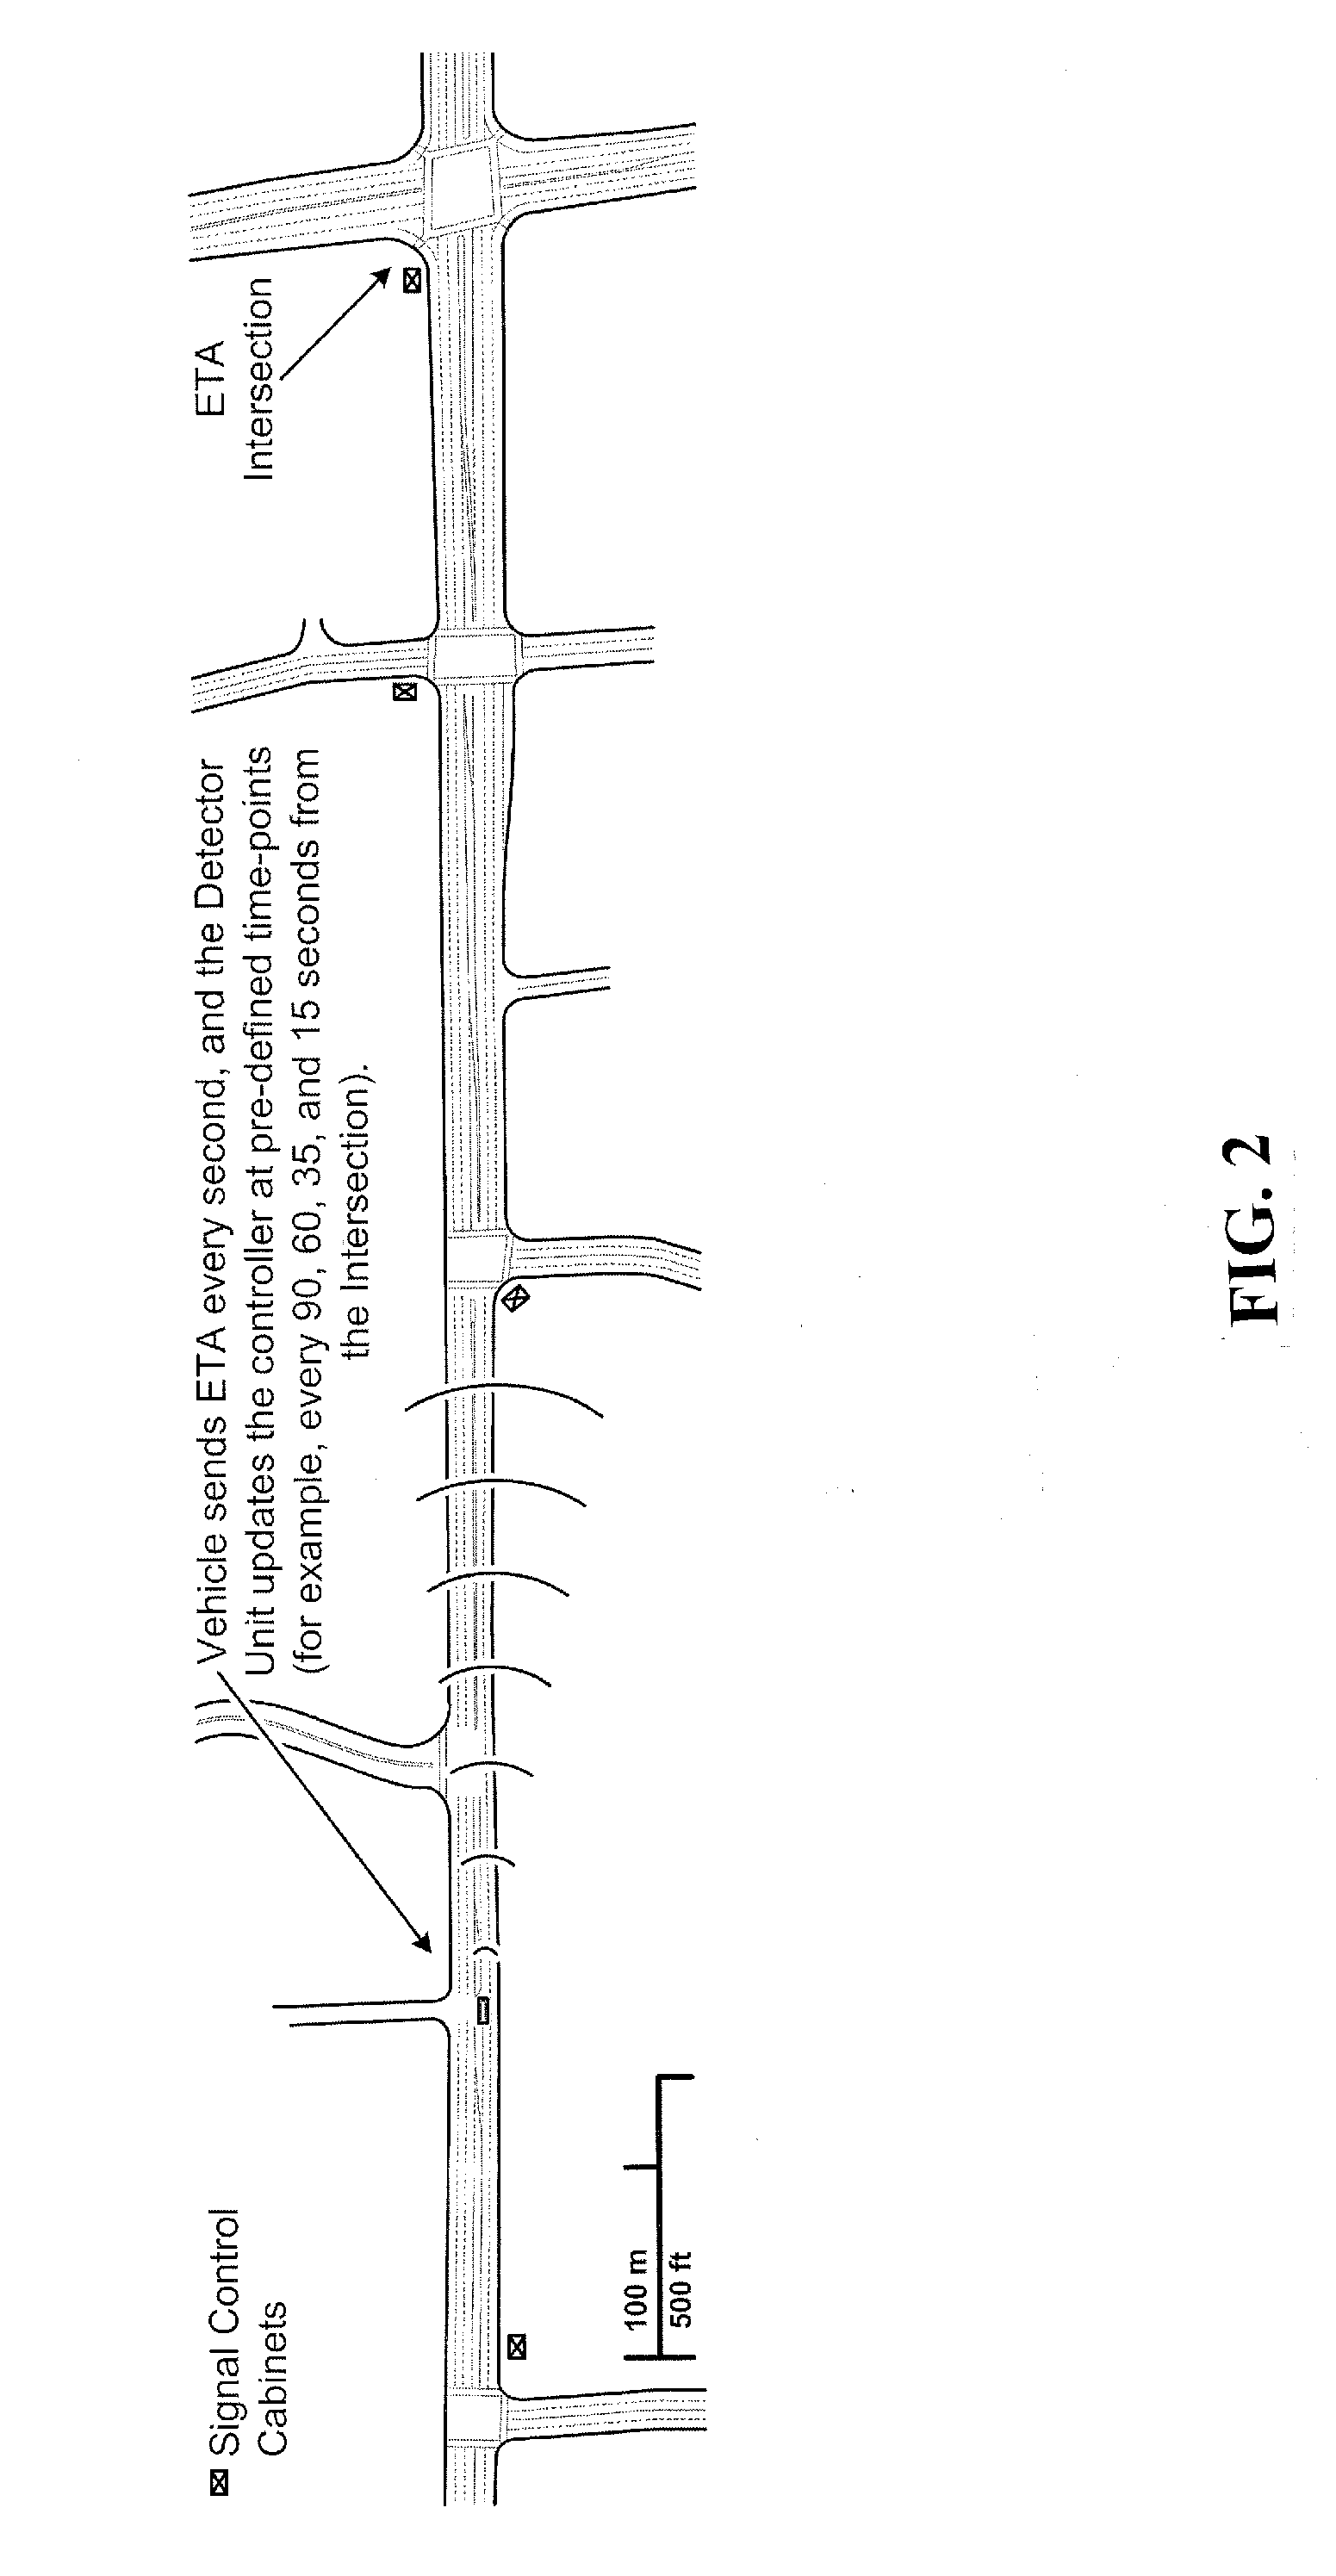 Signal Light Priority System Utilizing Estimated Time of Arrival